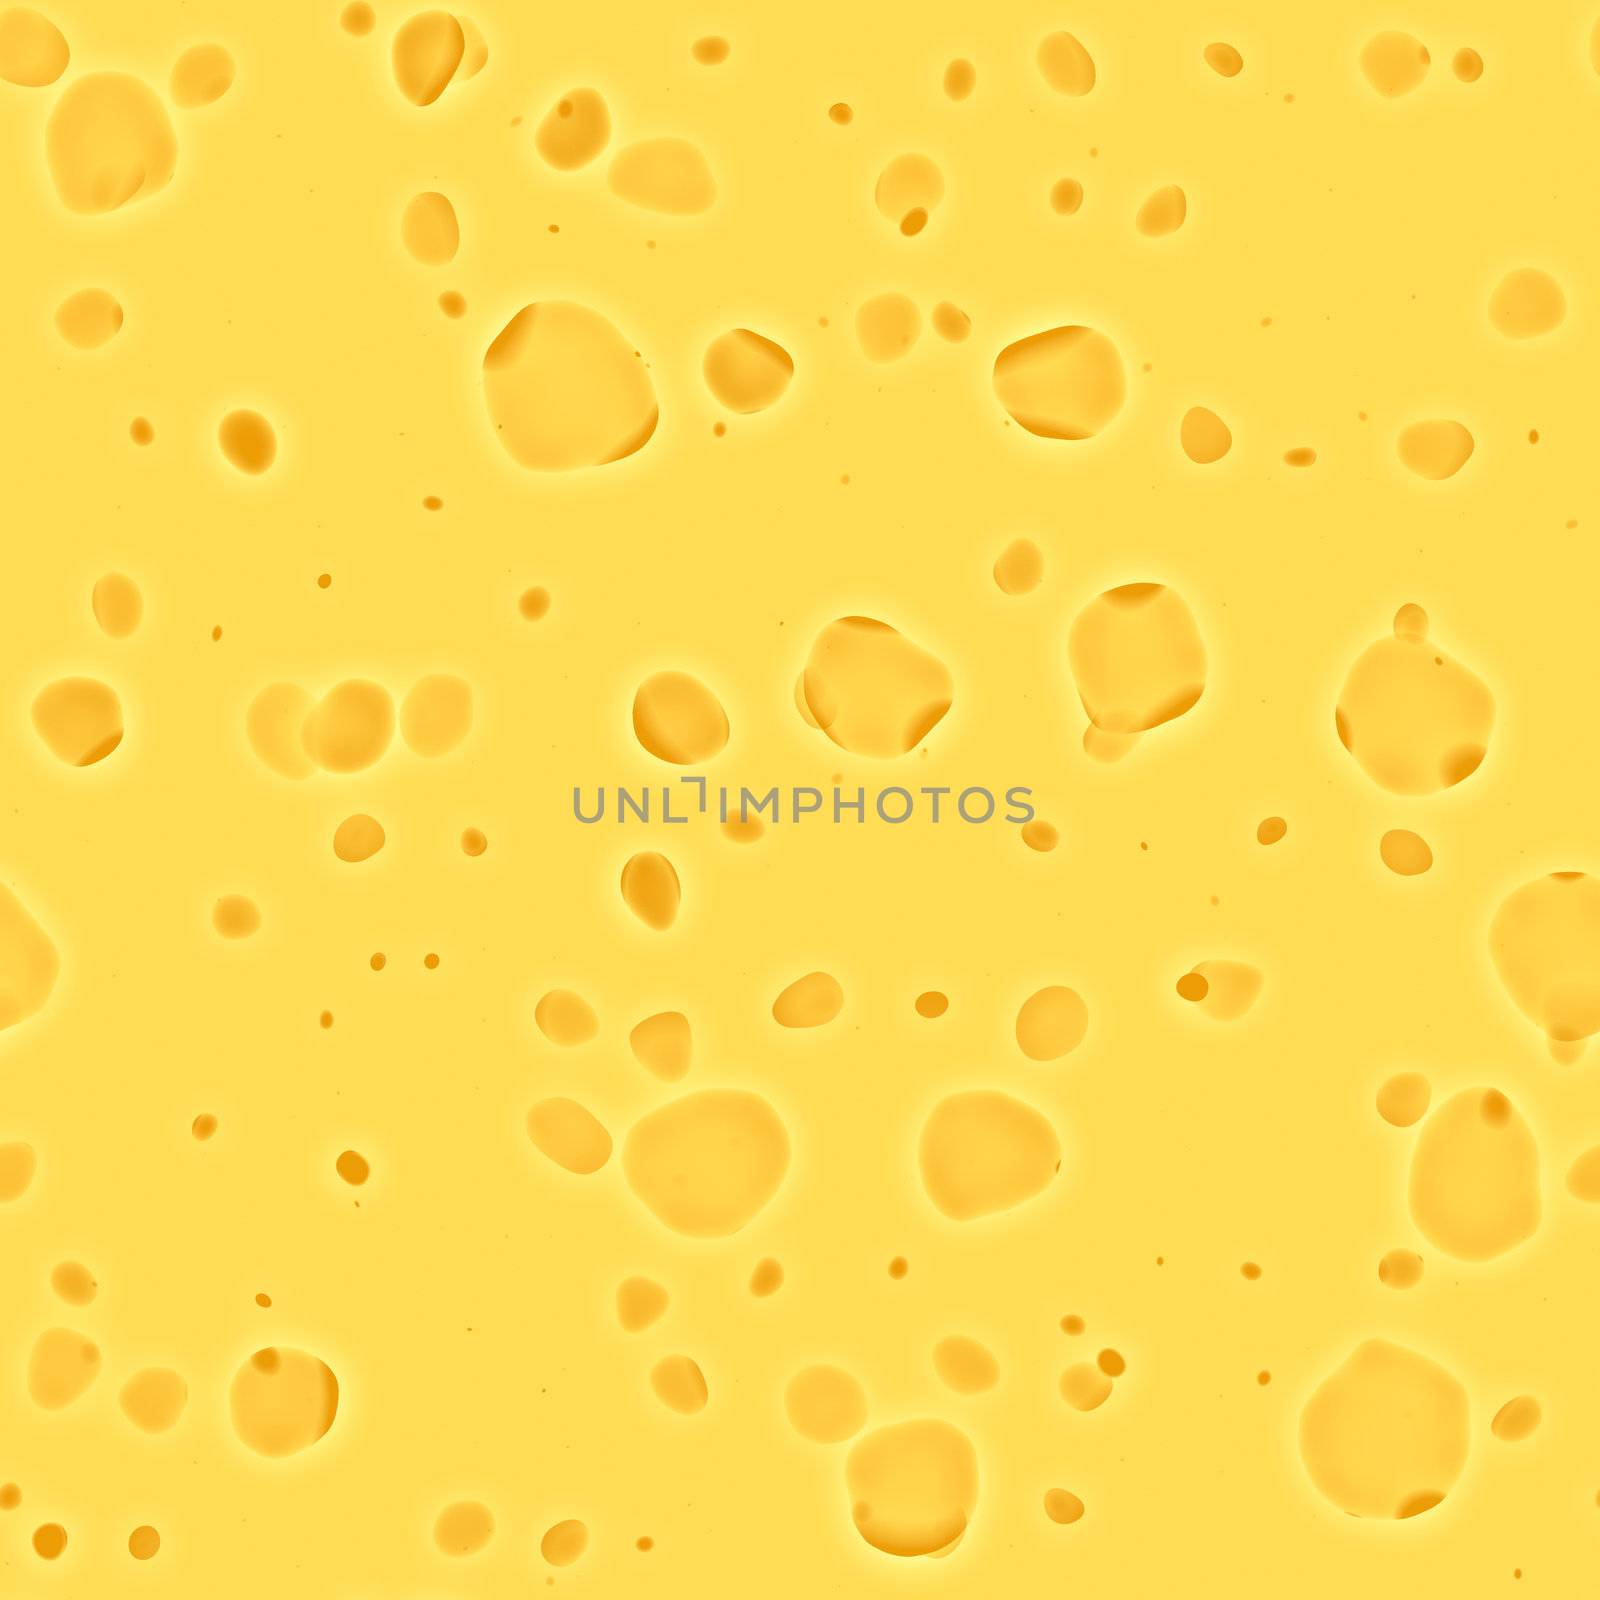 cheese texture, seamless repeat high resolution pattern